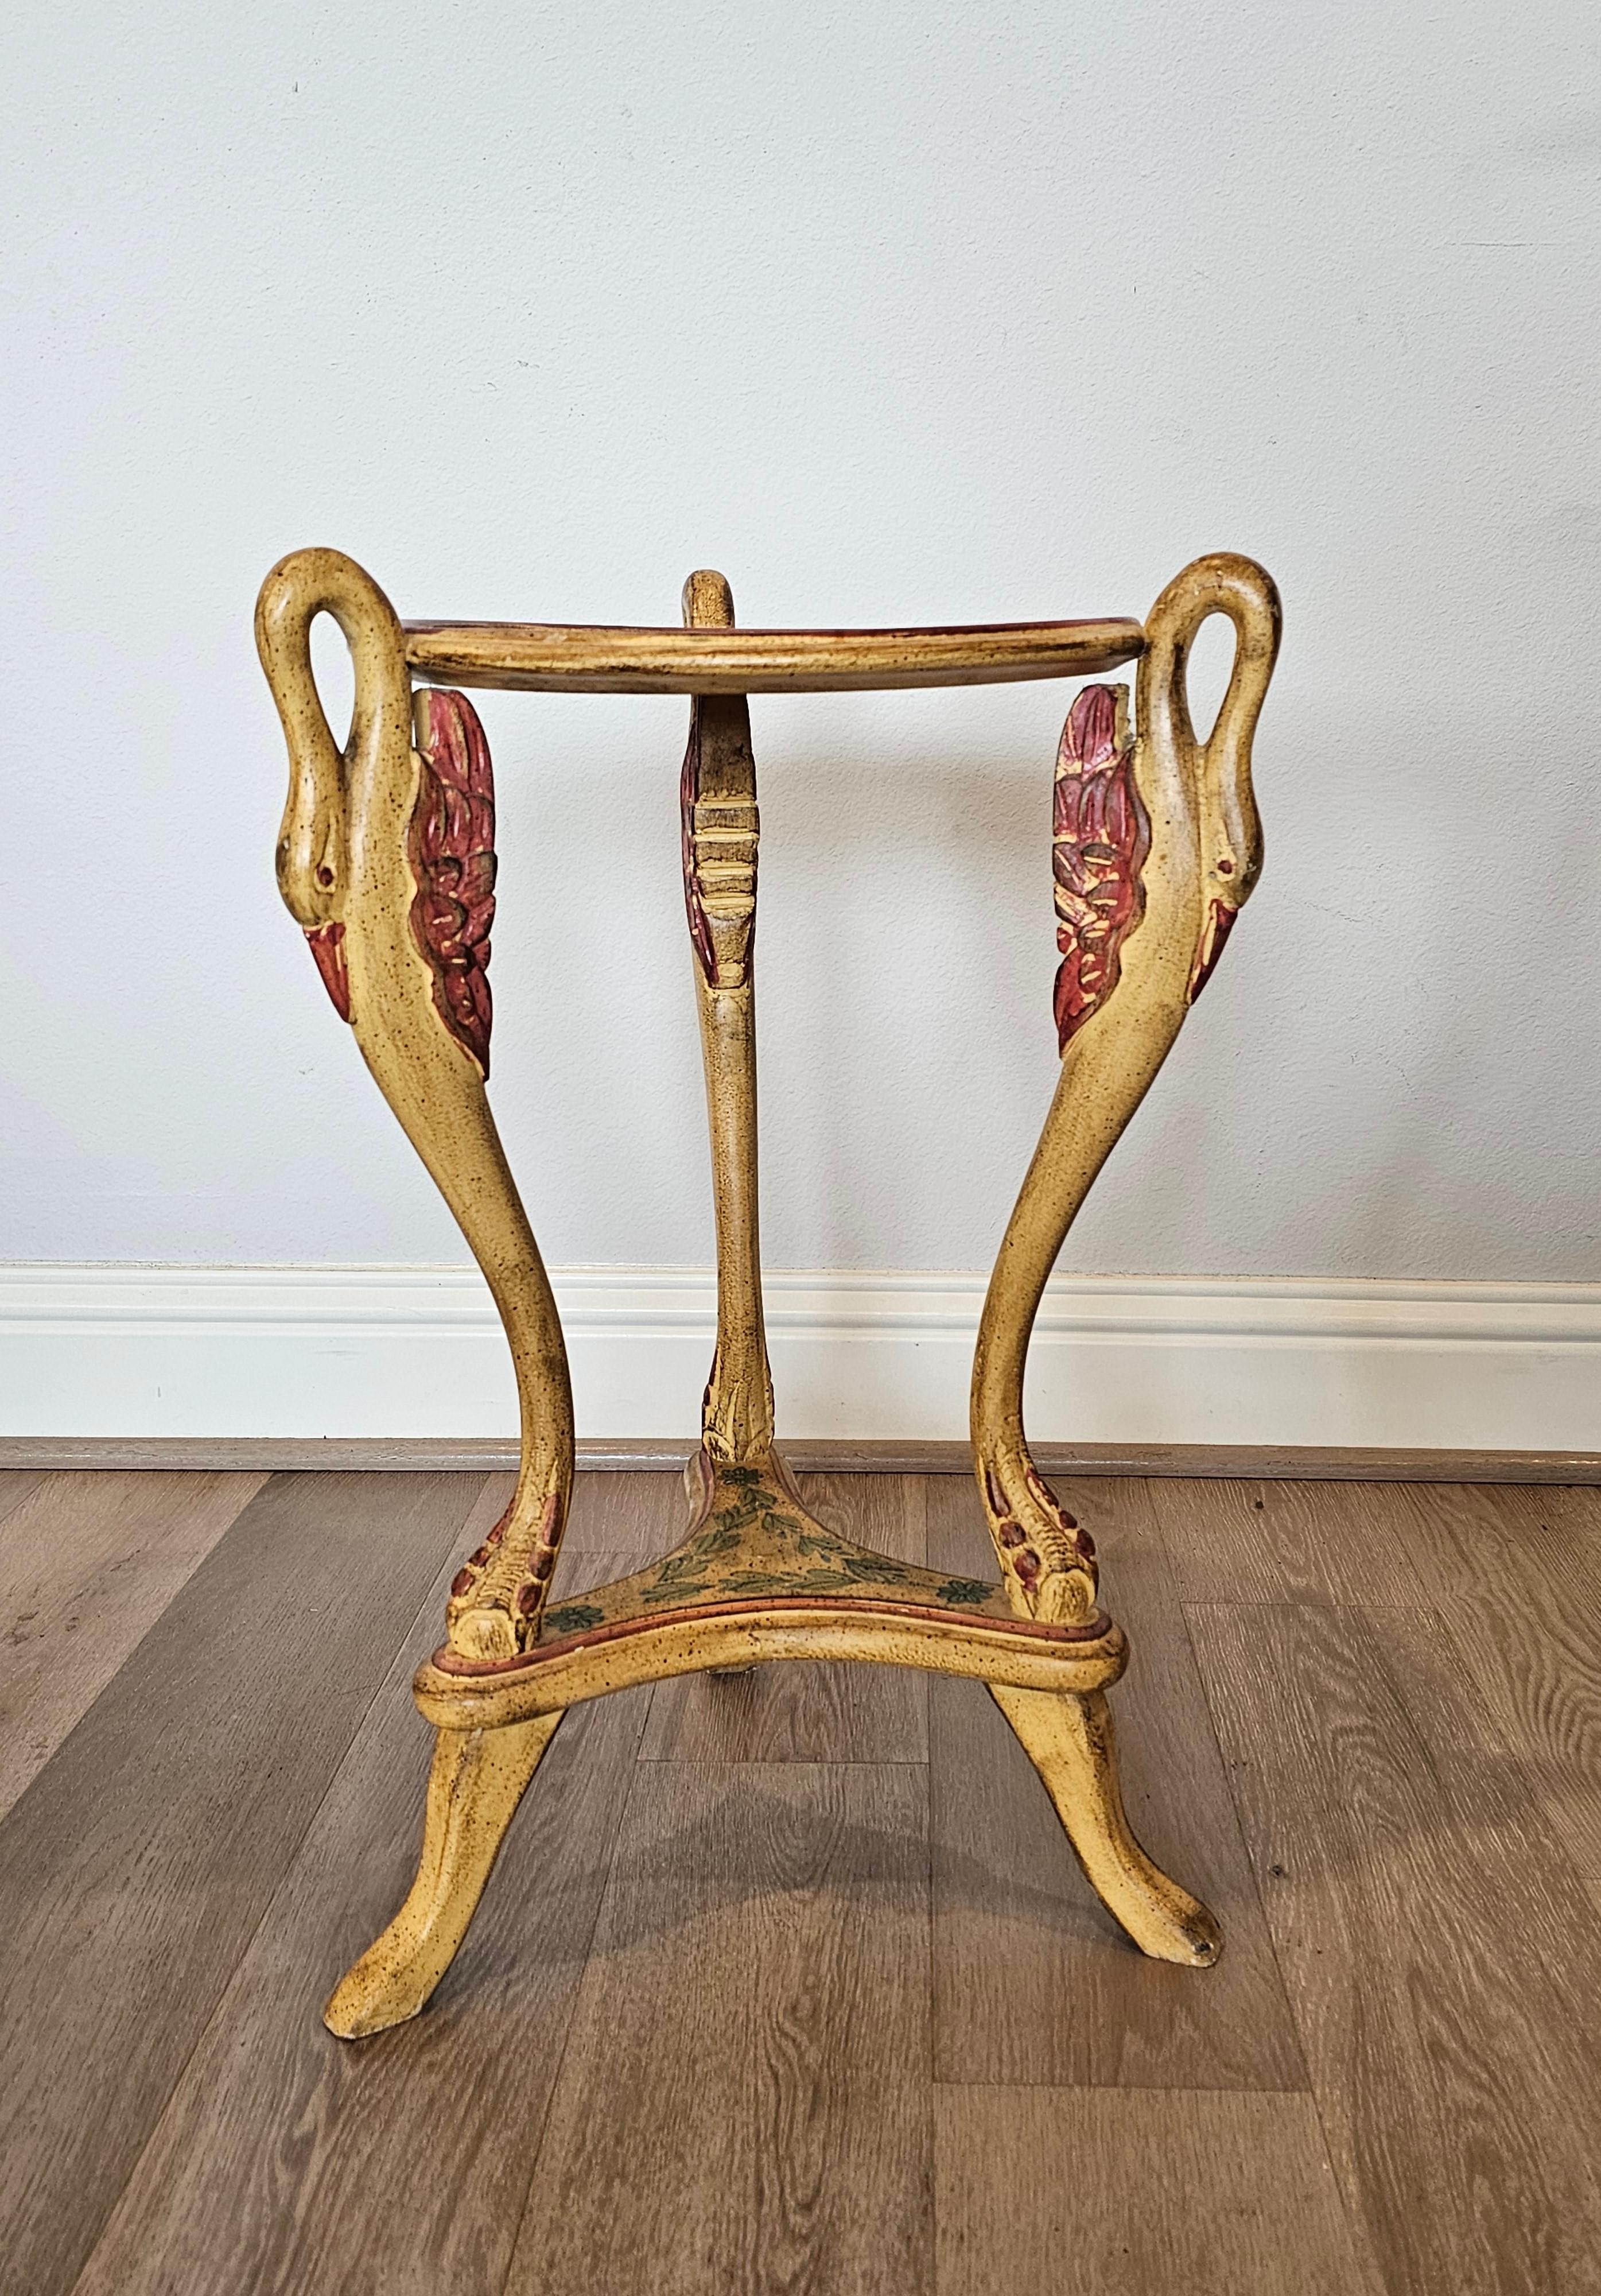 Vintage Neoclassical Revival Painted Swan Guéridon Table For Sale 2